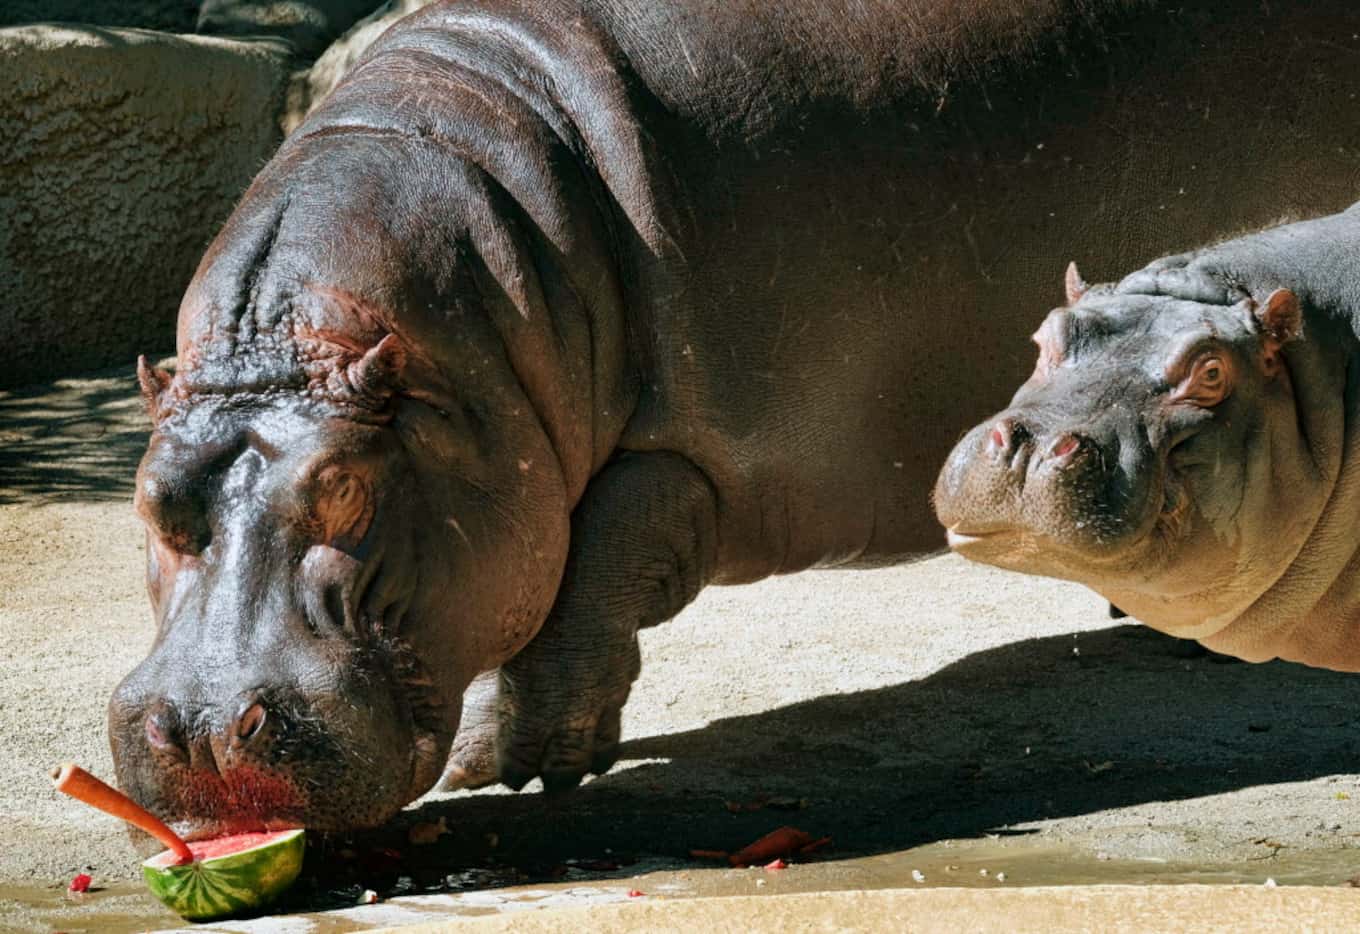 Rosie (right) watches as Adhama snacks on a carrots and watermelon in their enclosure at the...